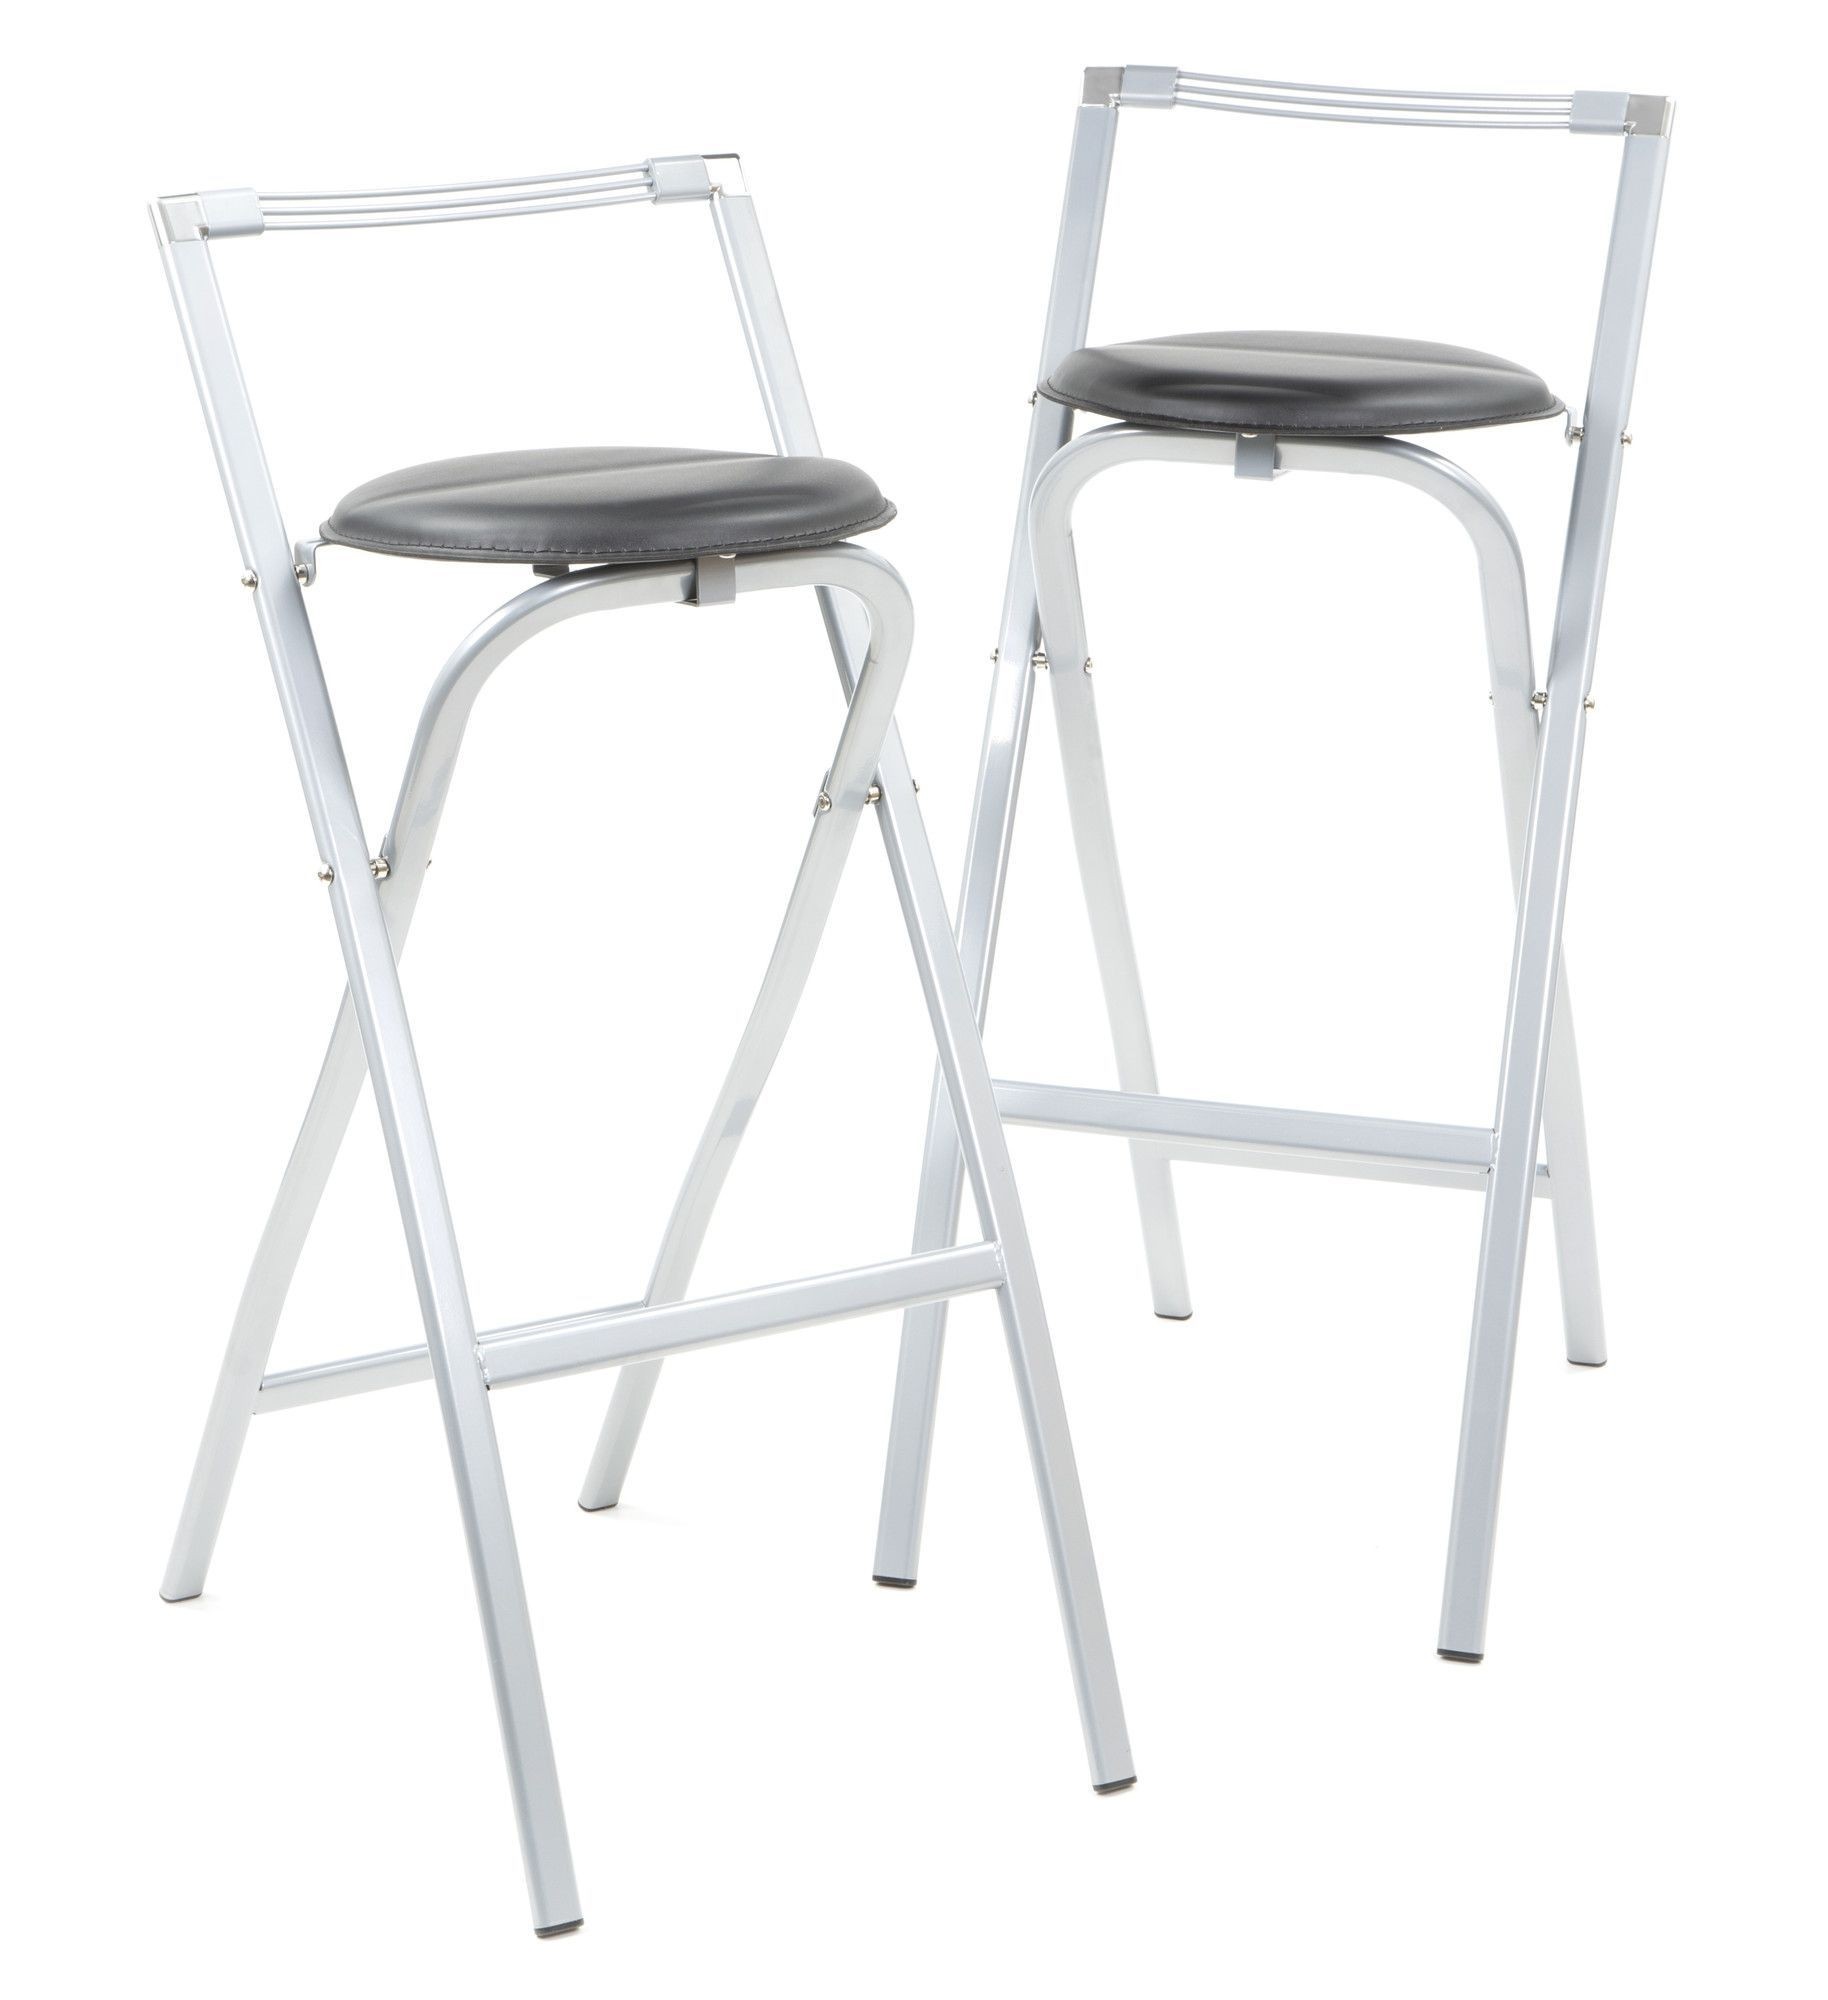 WHITE HOMION Folding Breakfast Wooden Bar Stool with Chrome Footrest Rubber for Kitchen Foldable Bar Restaurant Wood